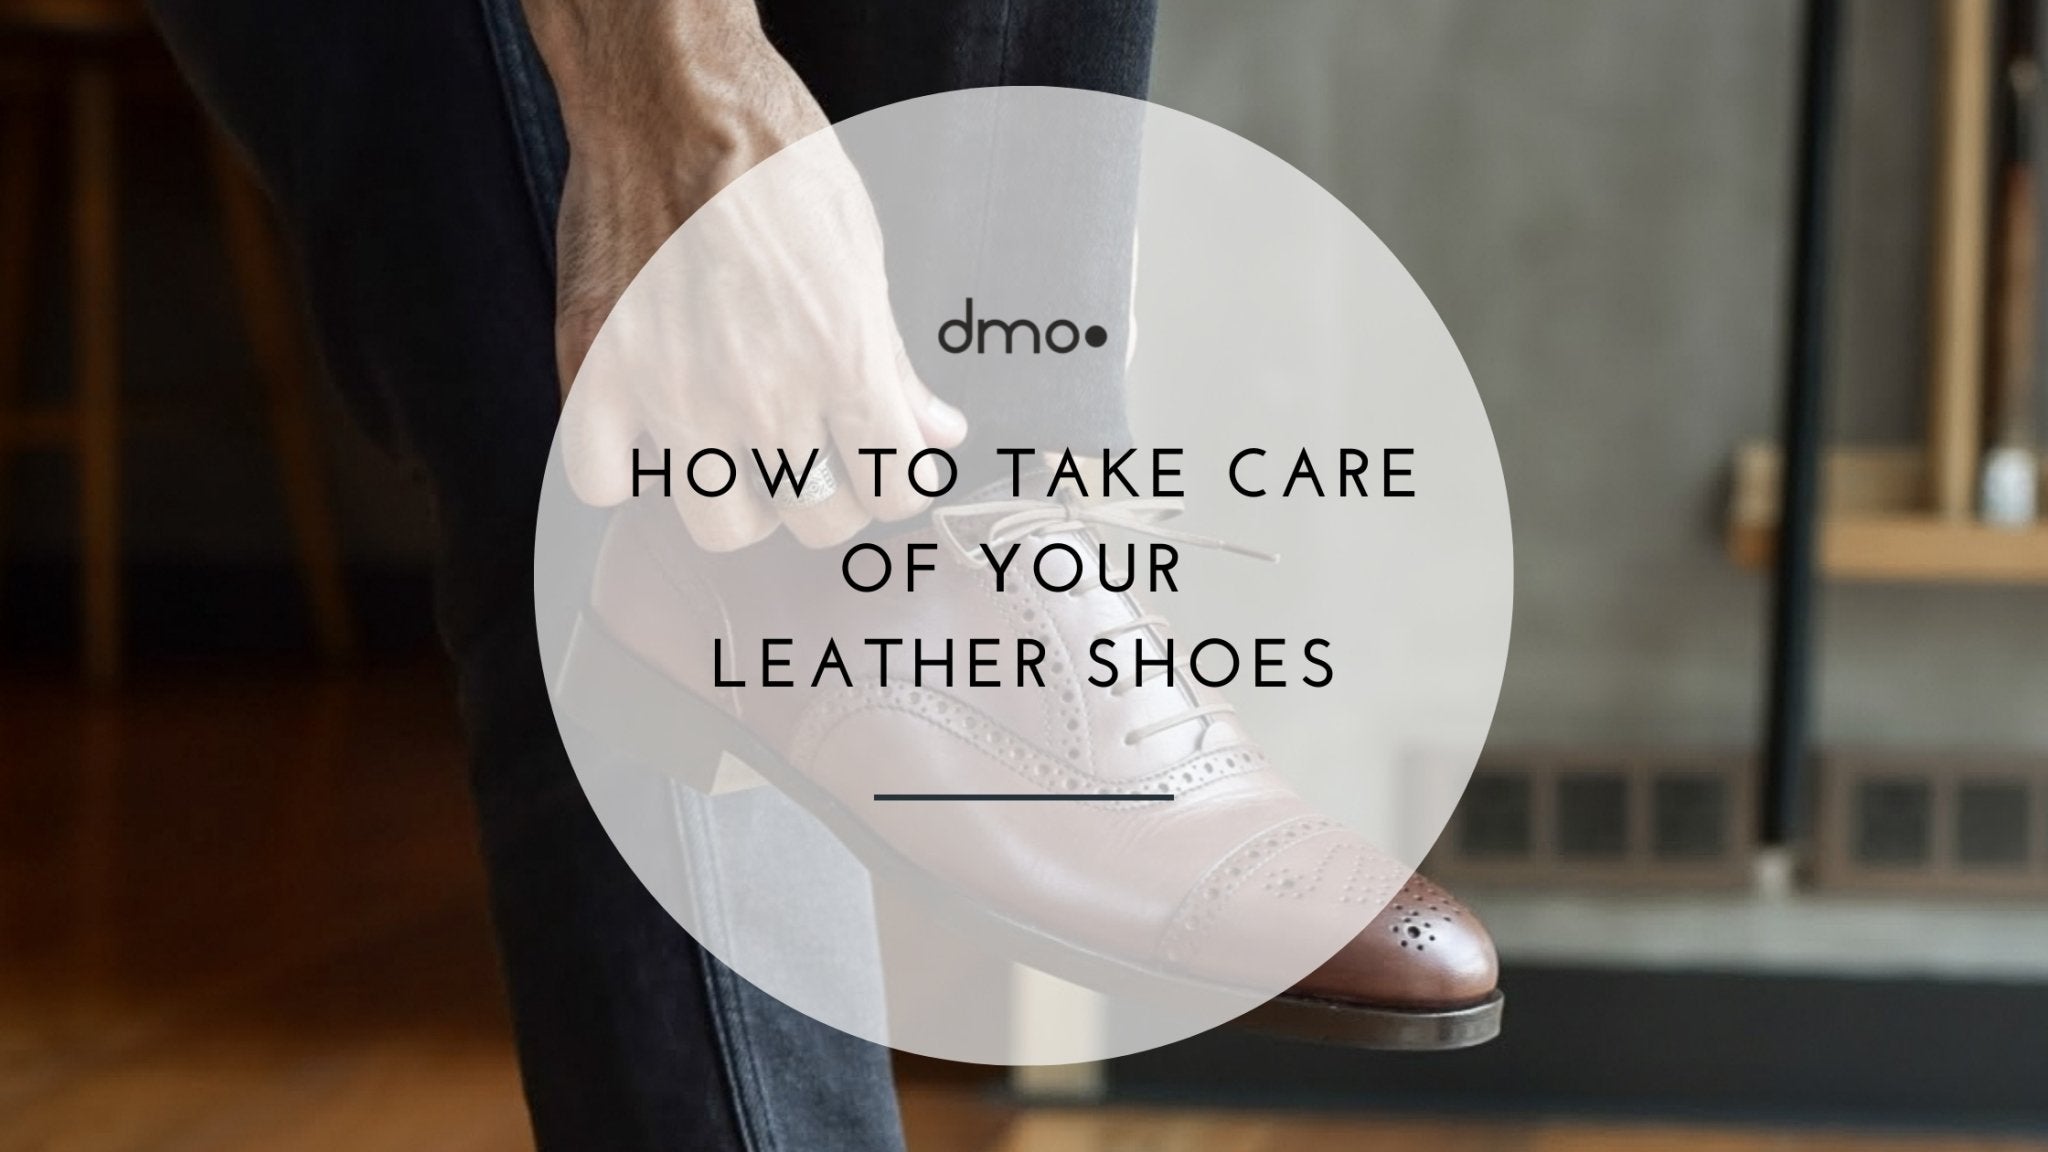 How to take care of your leather shoes - dmodot Shoes